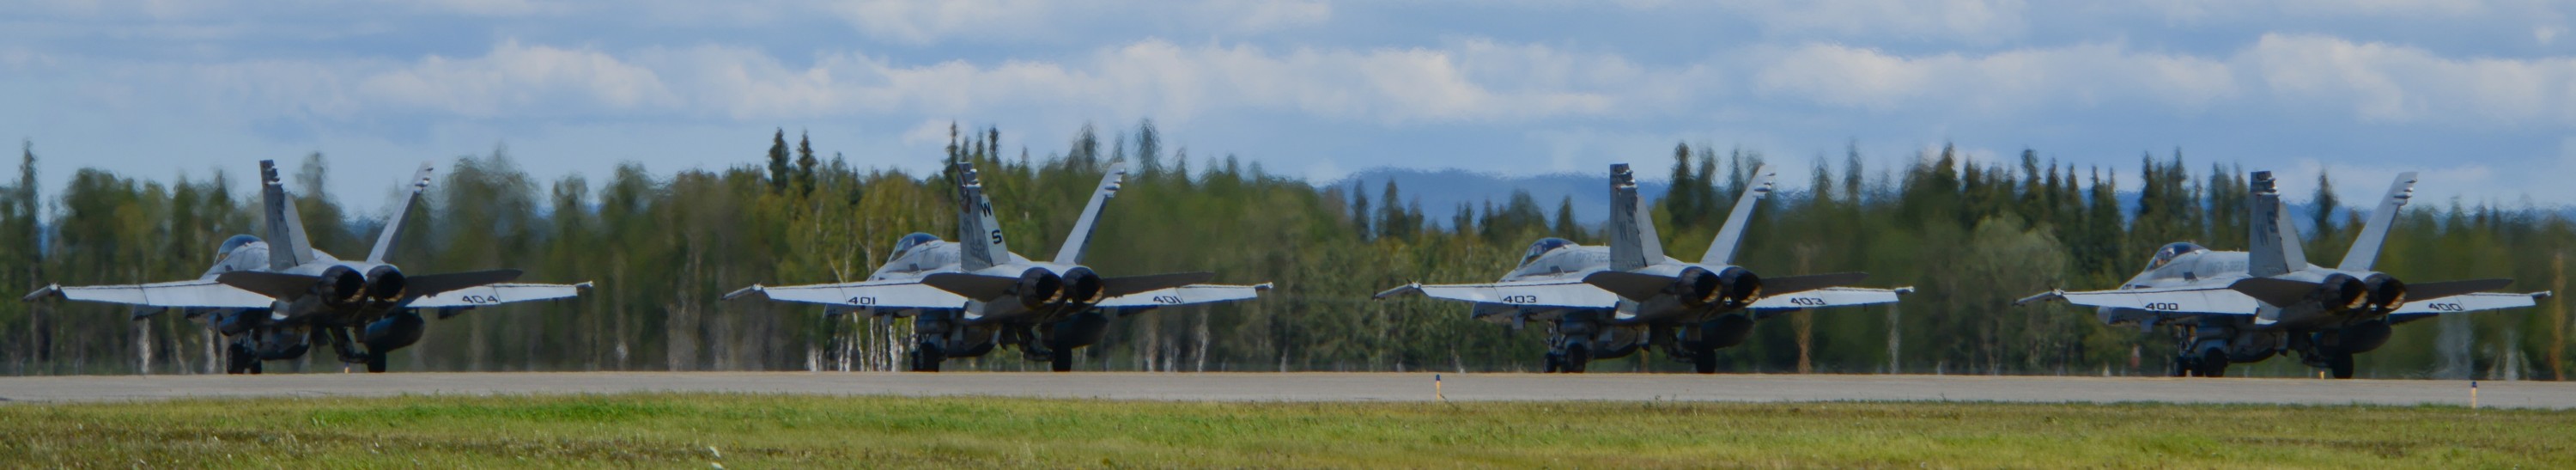 vmfa-323 death rattlers marine fighter attack squadron f/a-18c hornet 153 eielson afb alaska red flag